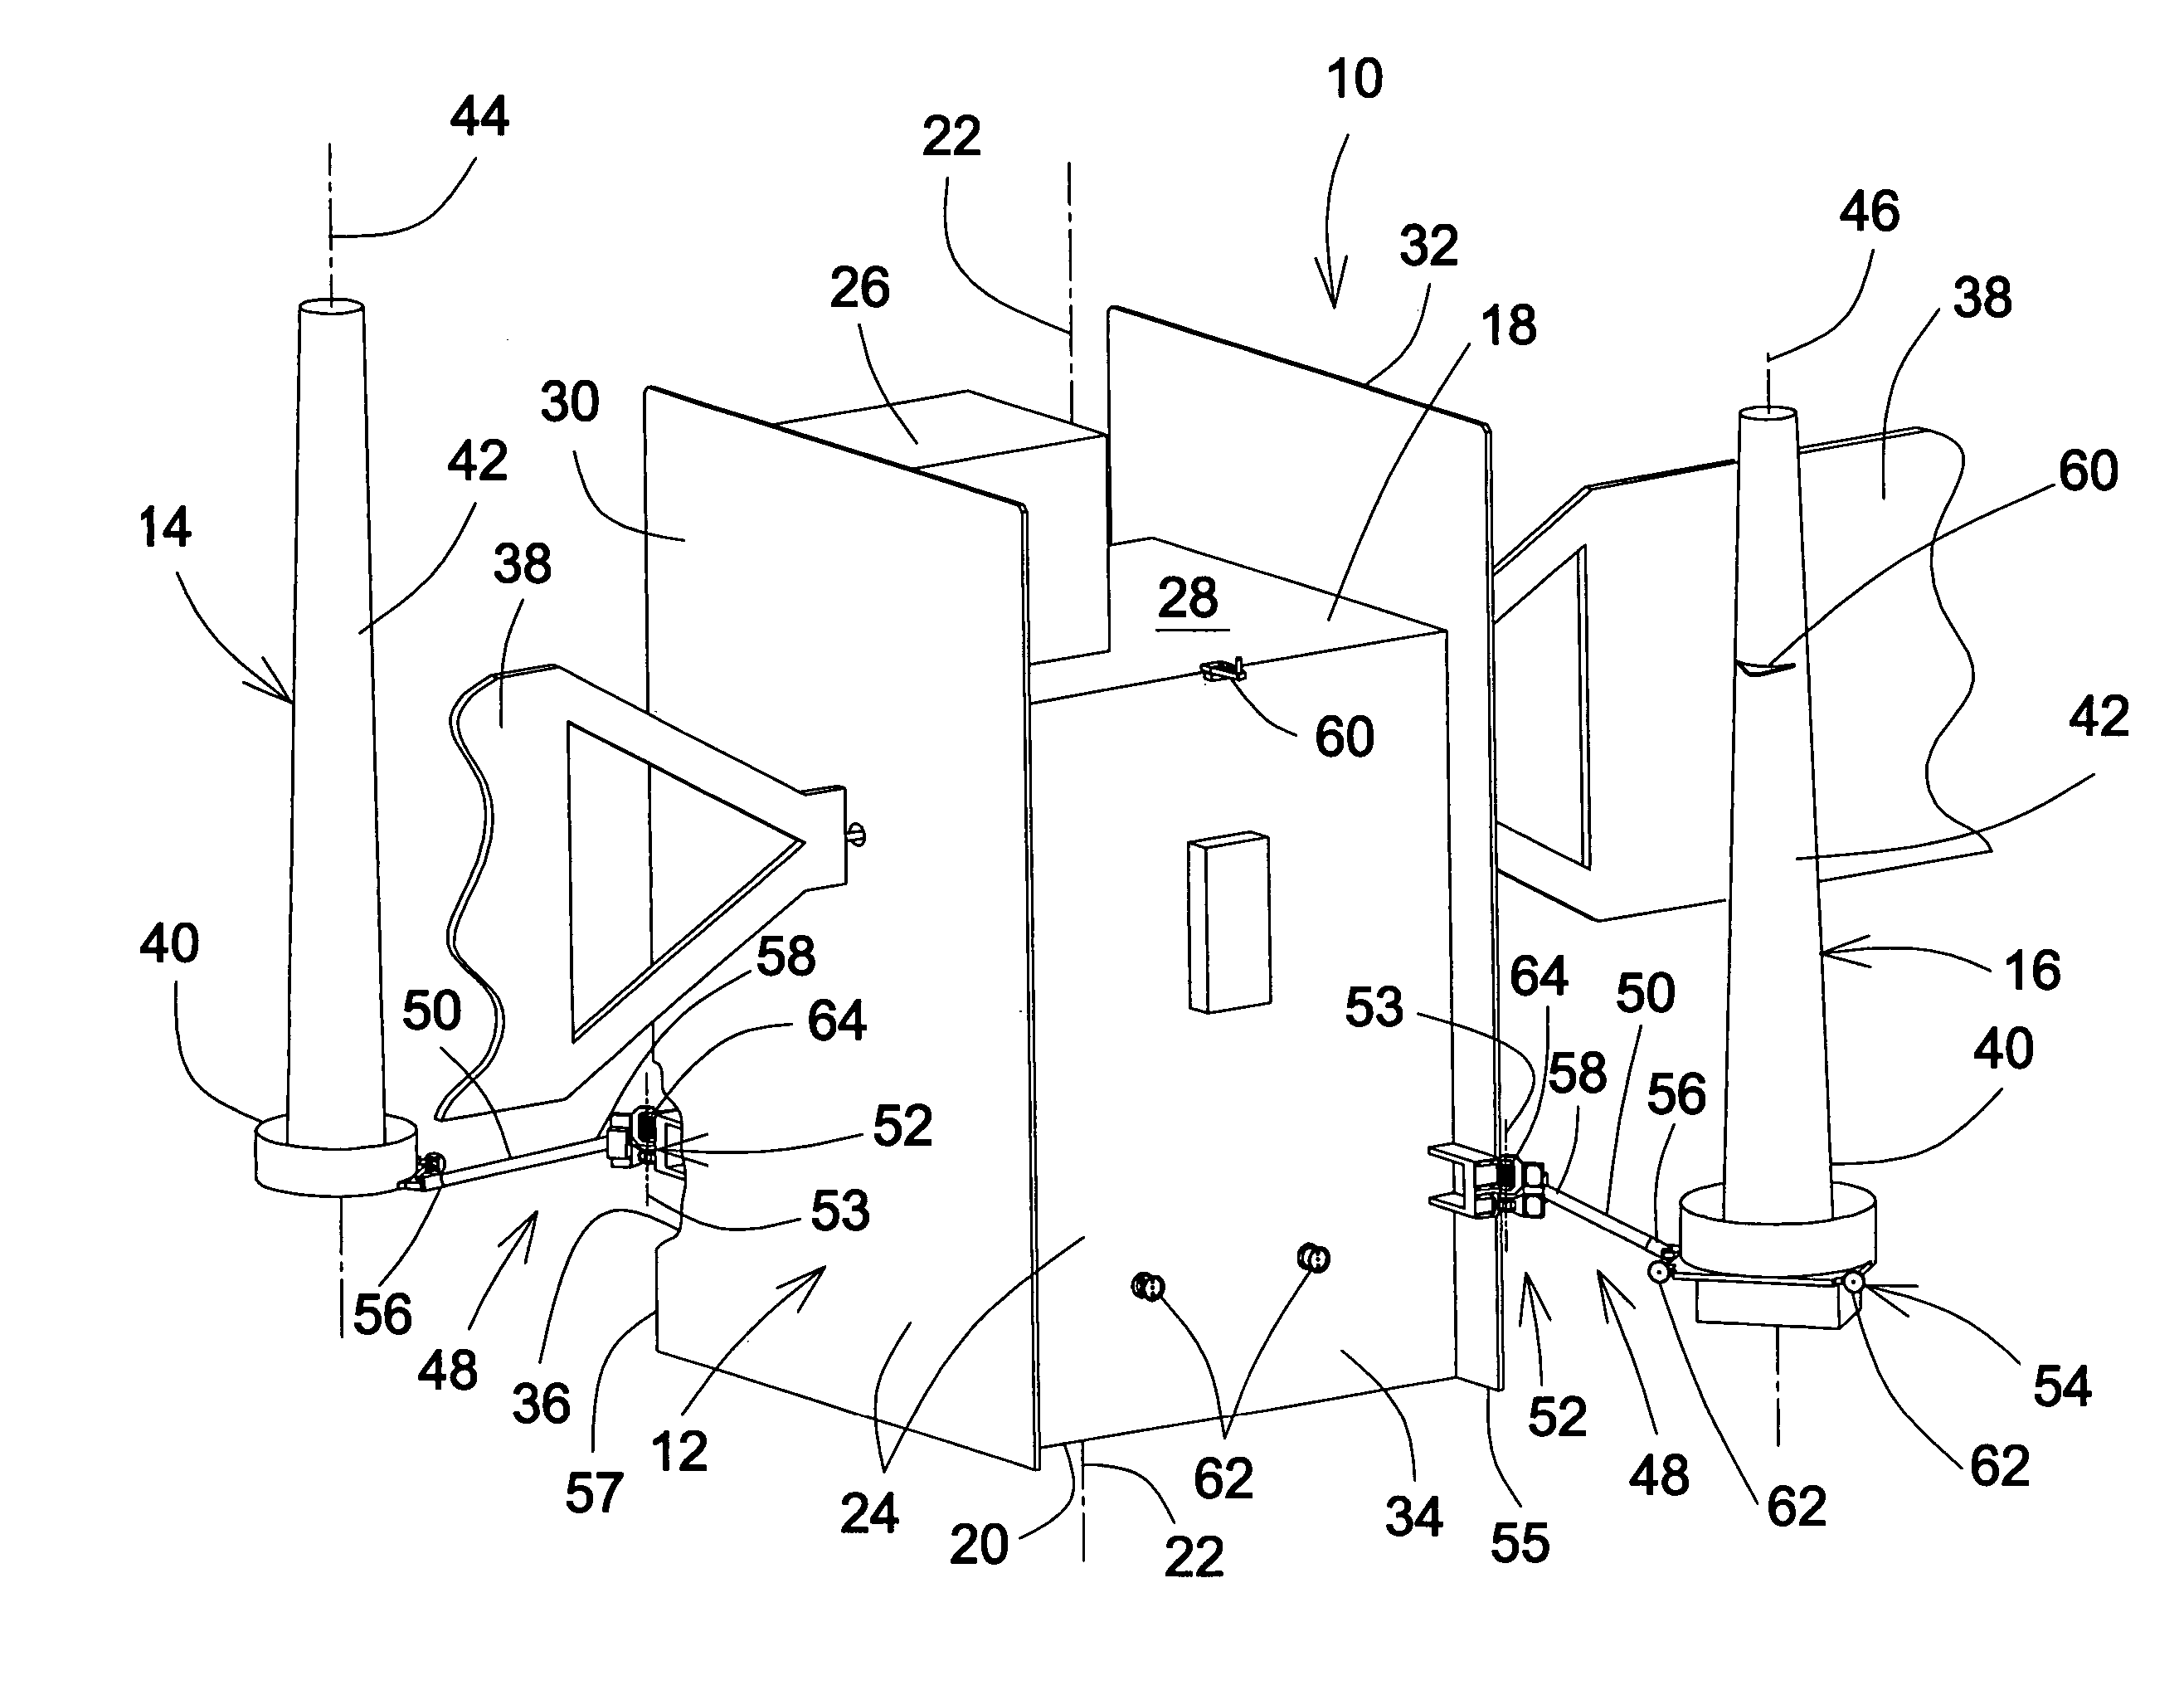 Method for improving isolation of an antenna mounted on a structure